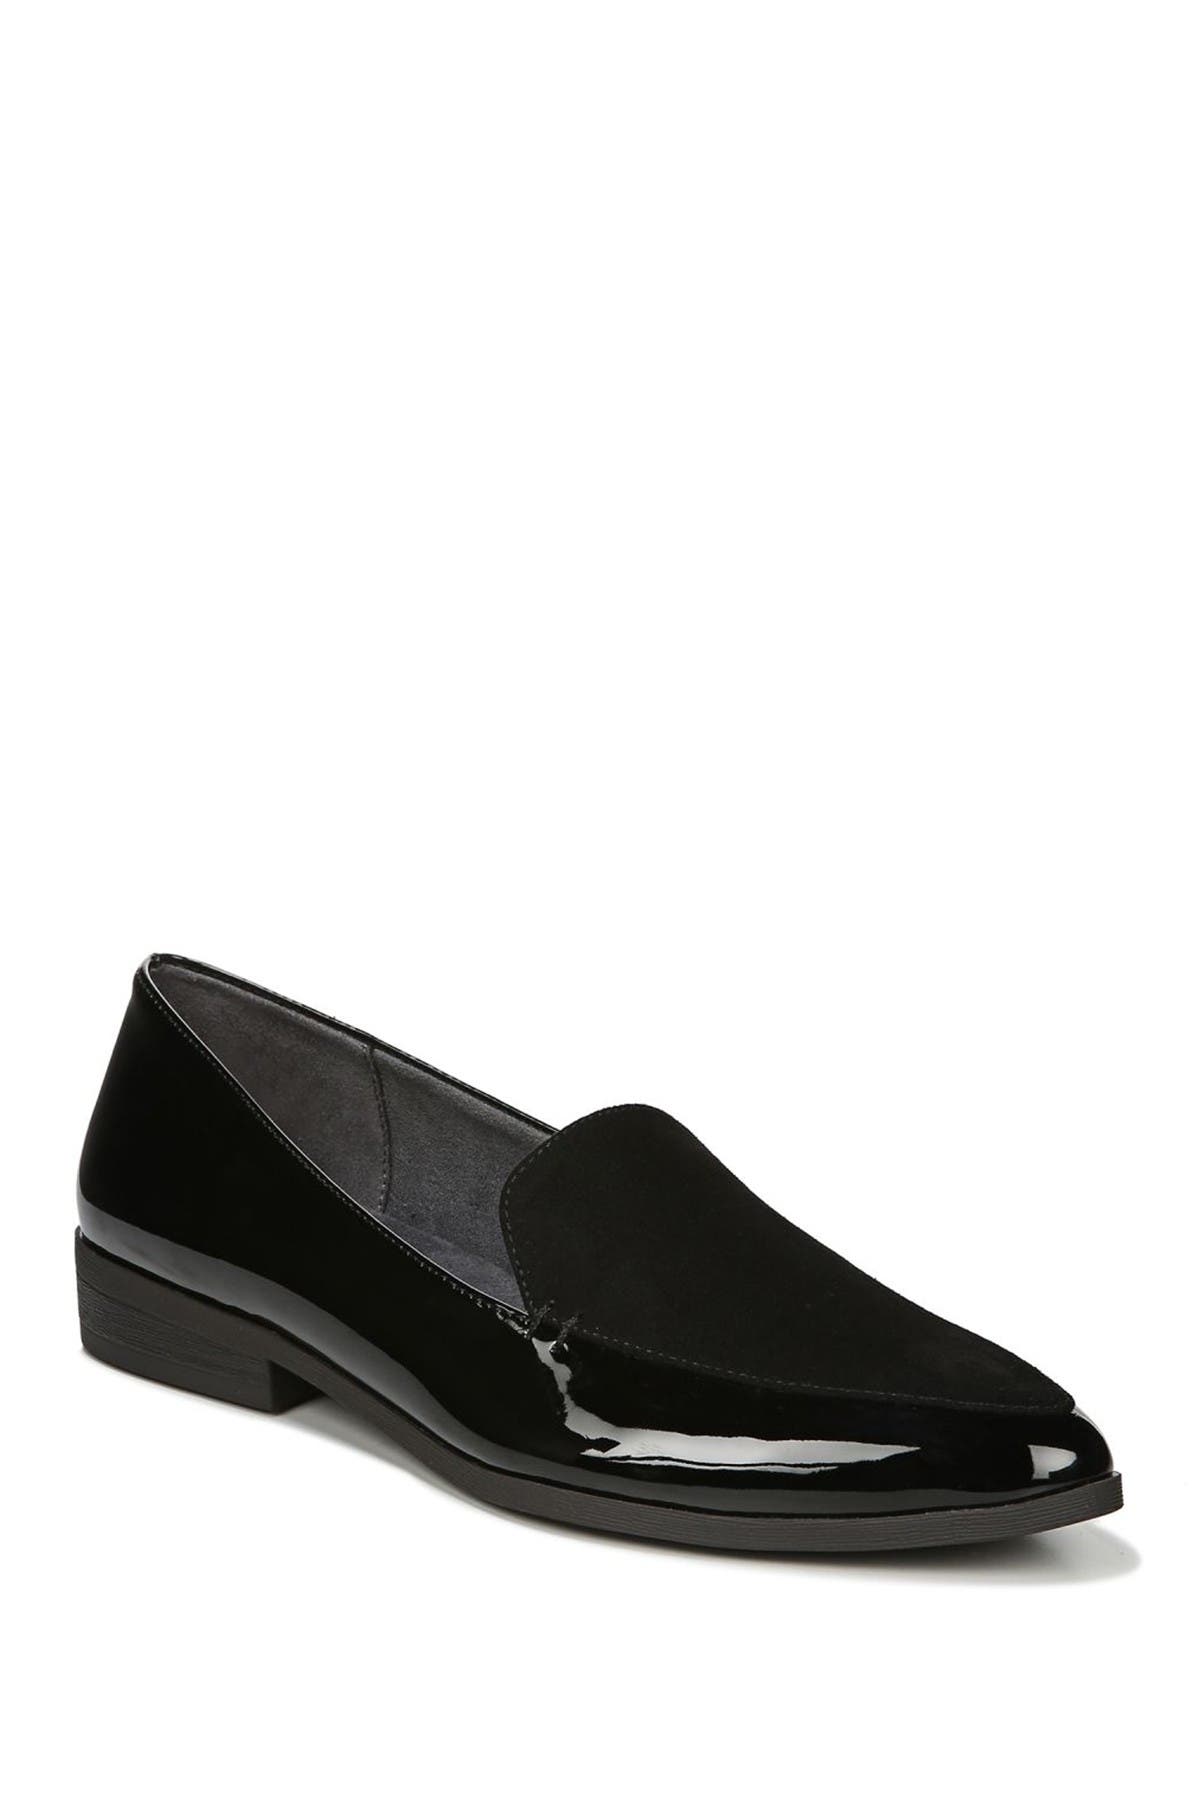 Astaire Patent Slip-On Loafer 